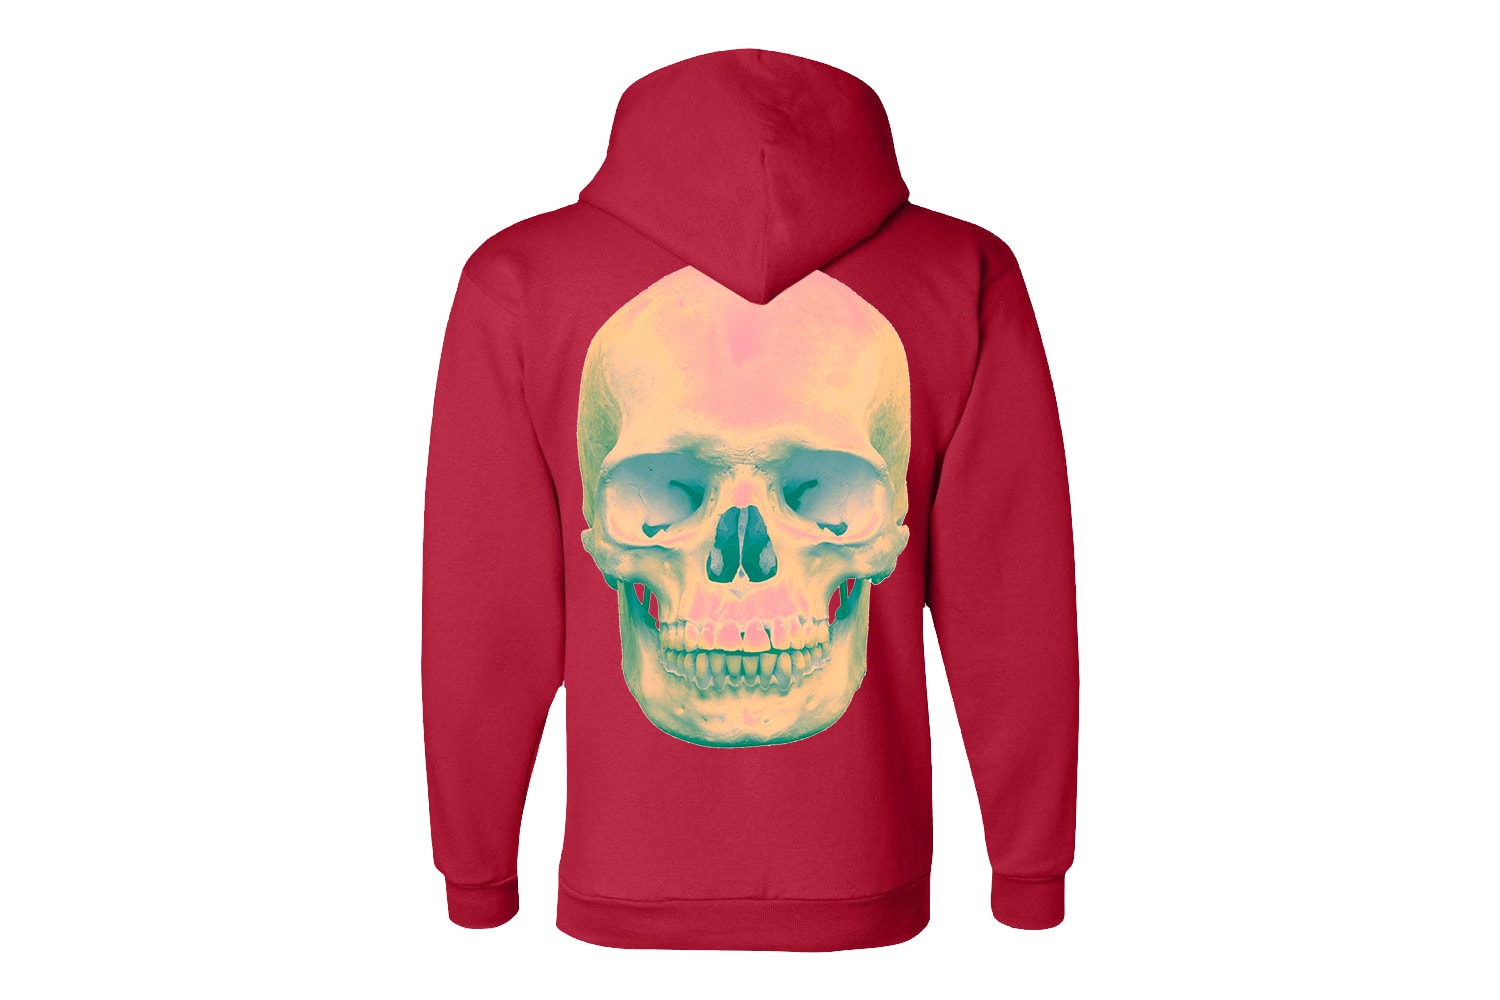 Marino Infantry New Items Hoodies floral skull fashion ASAP Ant March 2018